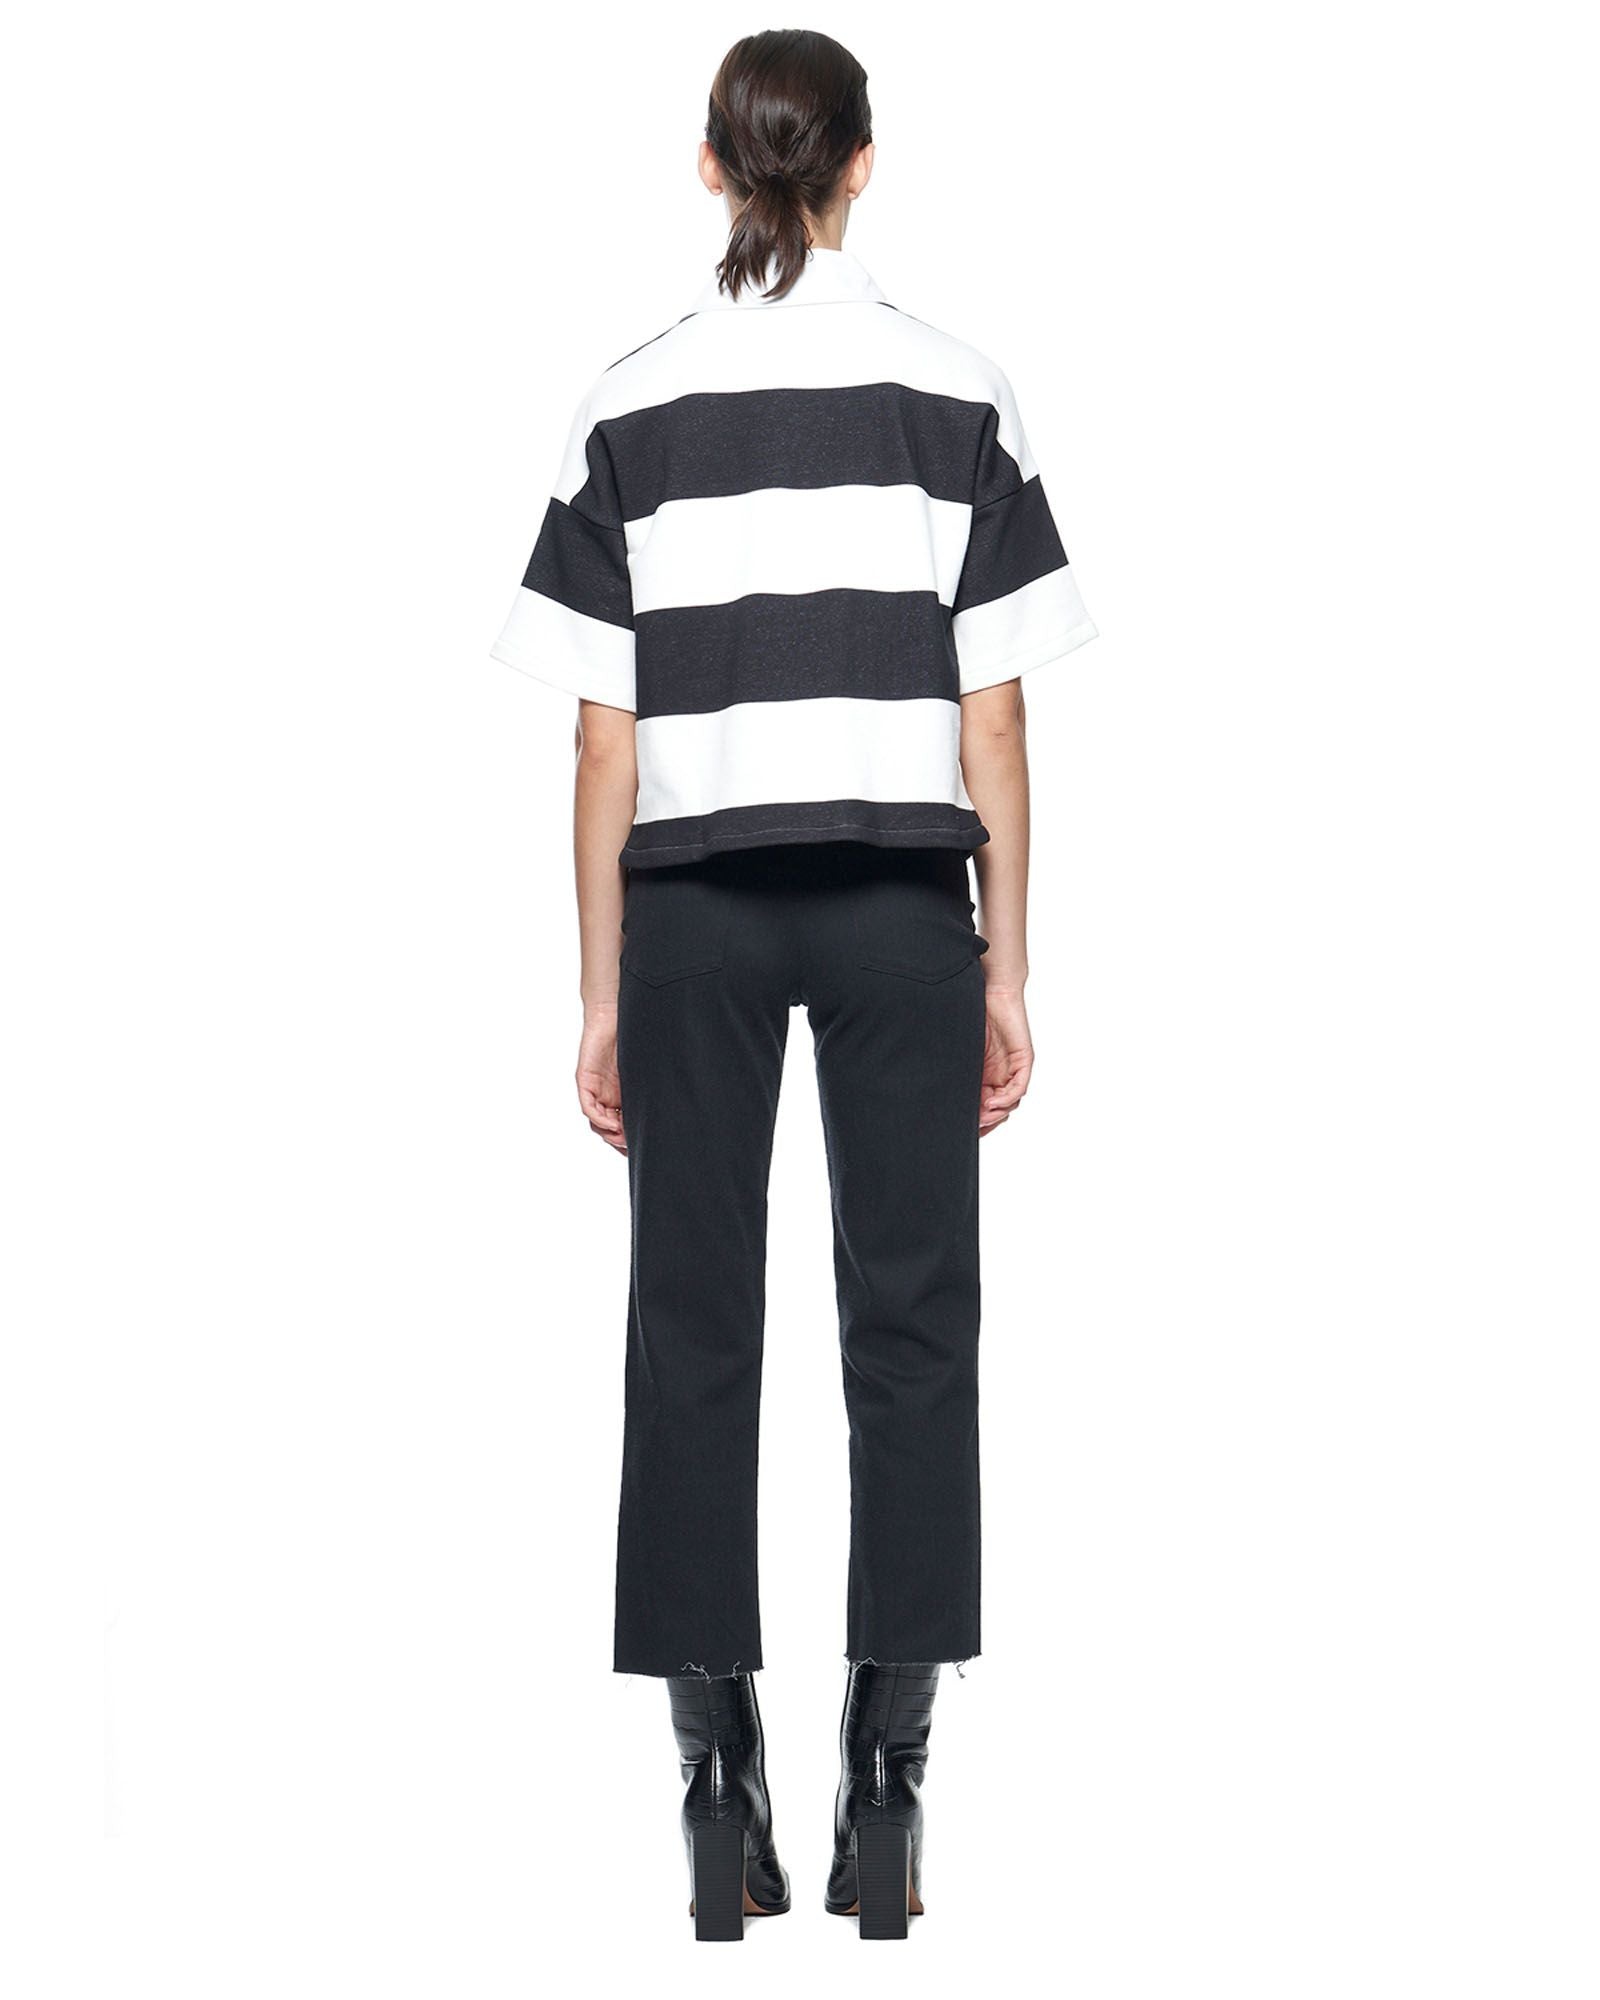 Rugby Shirt | Black and White Stripe